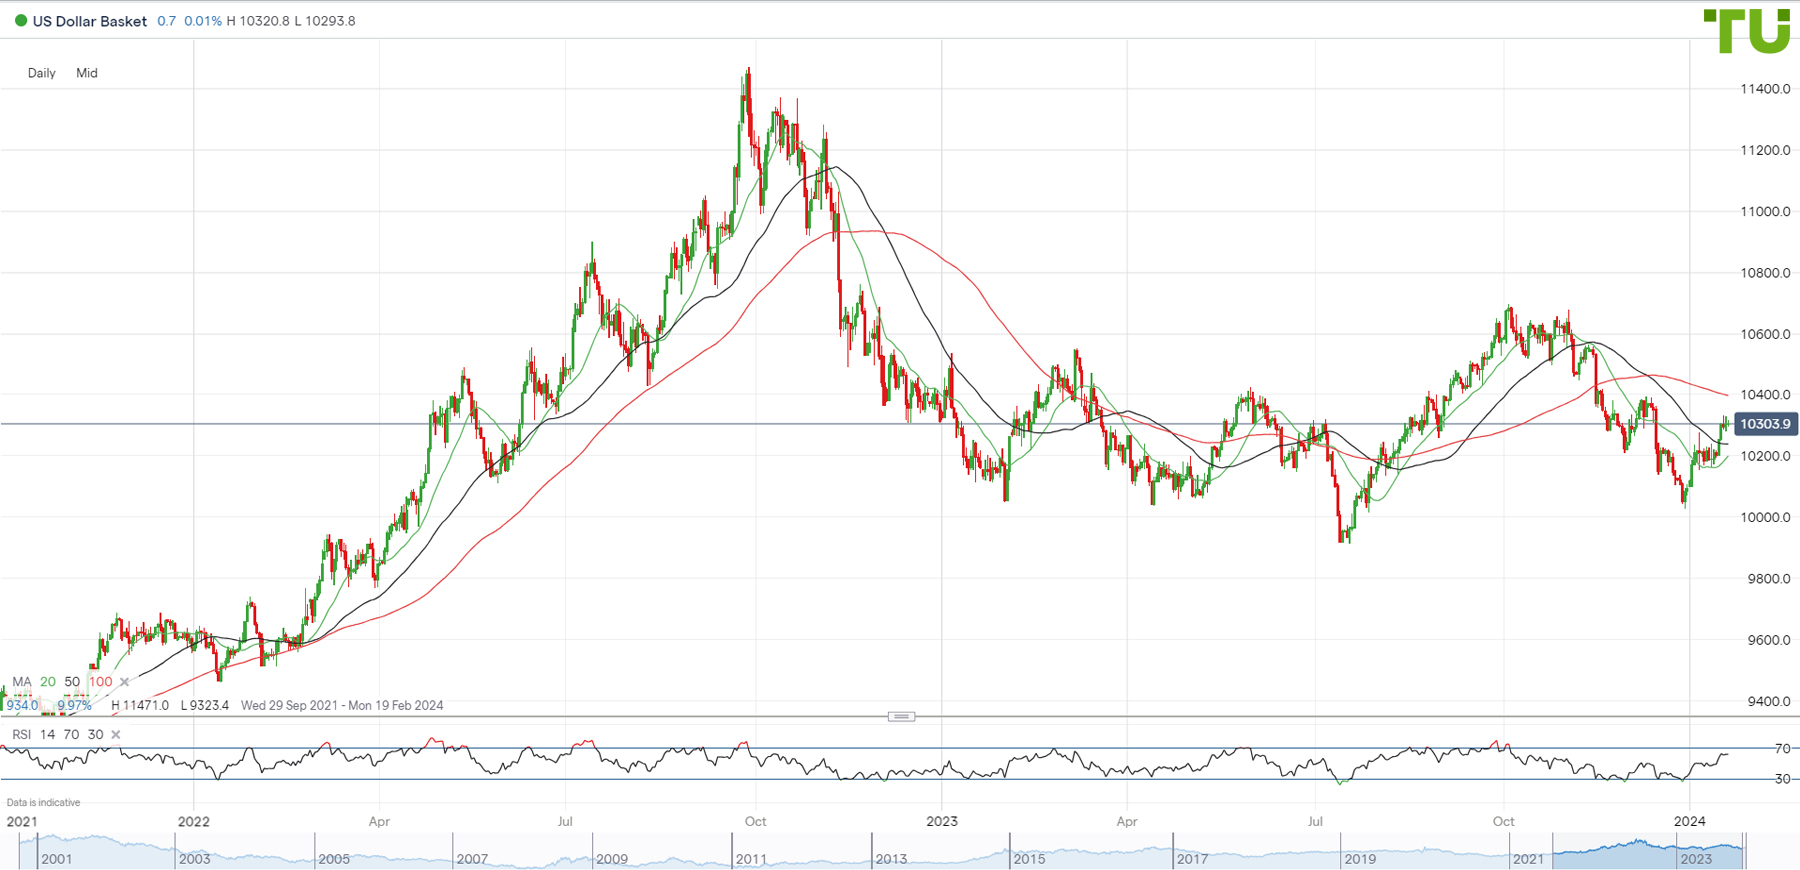 USD INDEX consolidates after growth